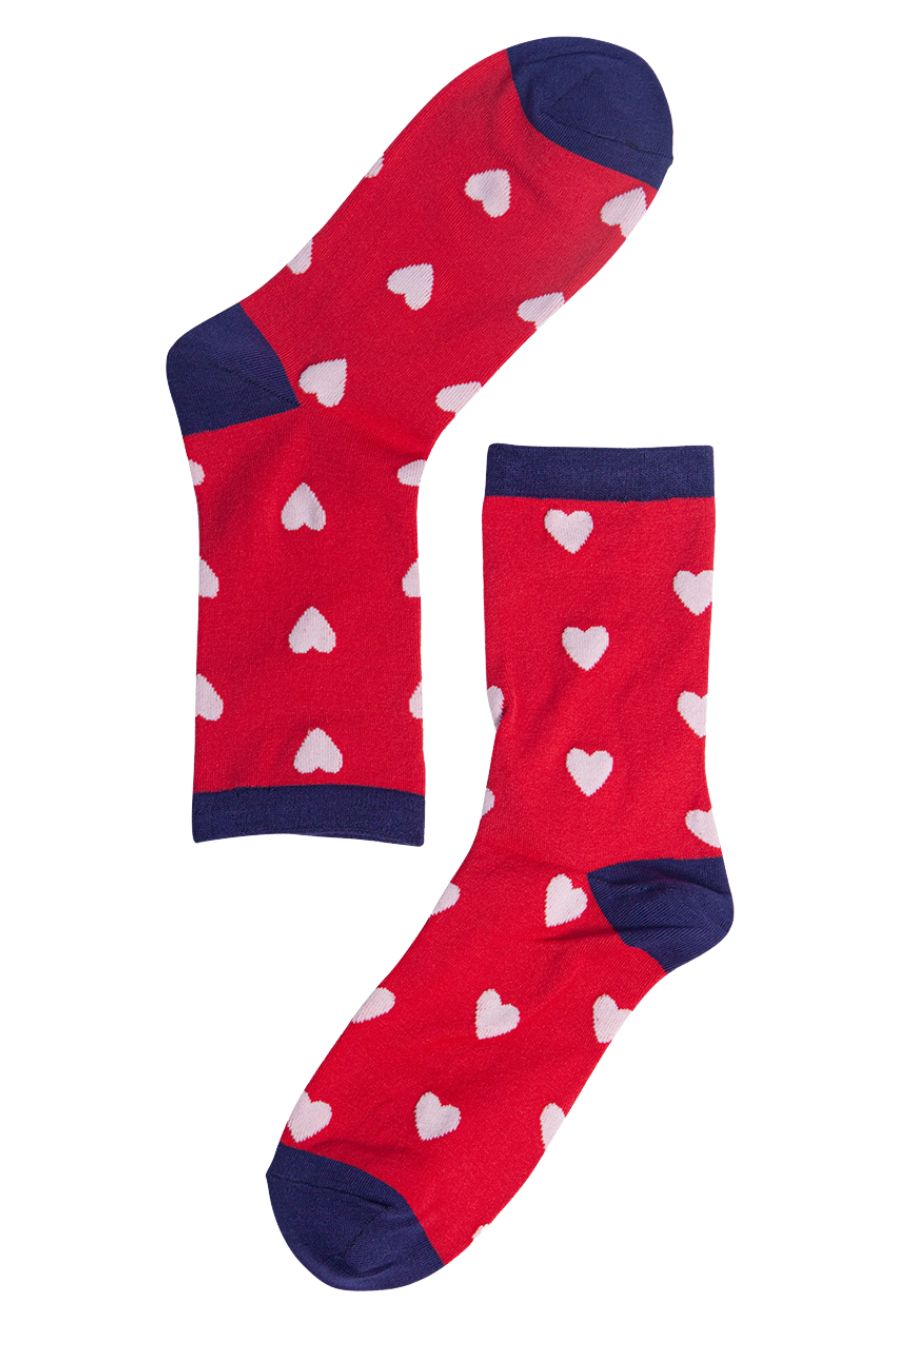 red, navy blue ankle socks with all over white love hearts